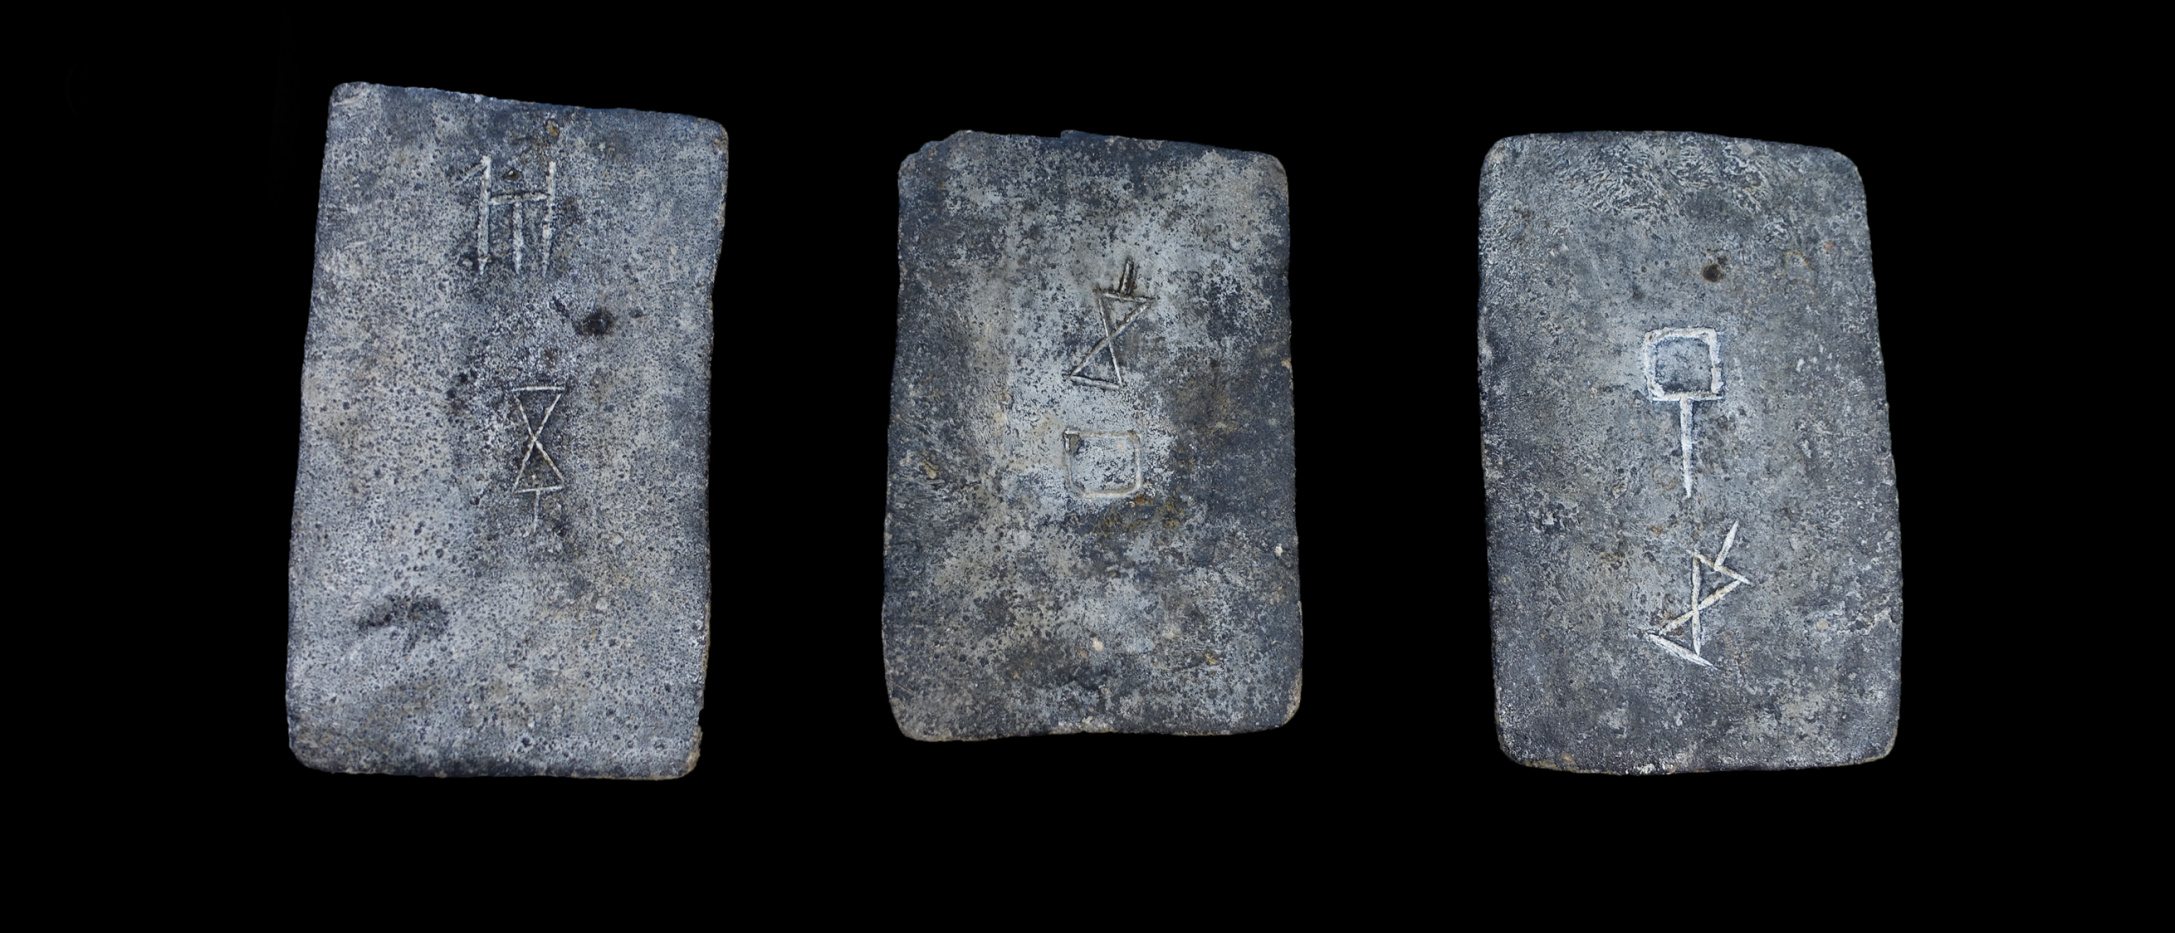 Some of the studied tin ingots from the sea off the coast of Israel (approx. 1300-1200 BCE).